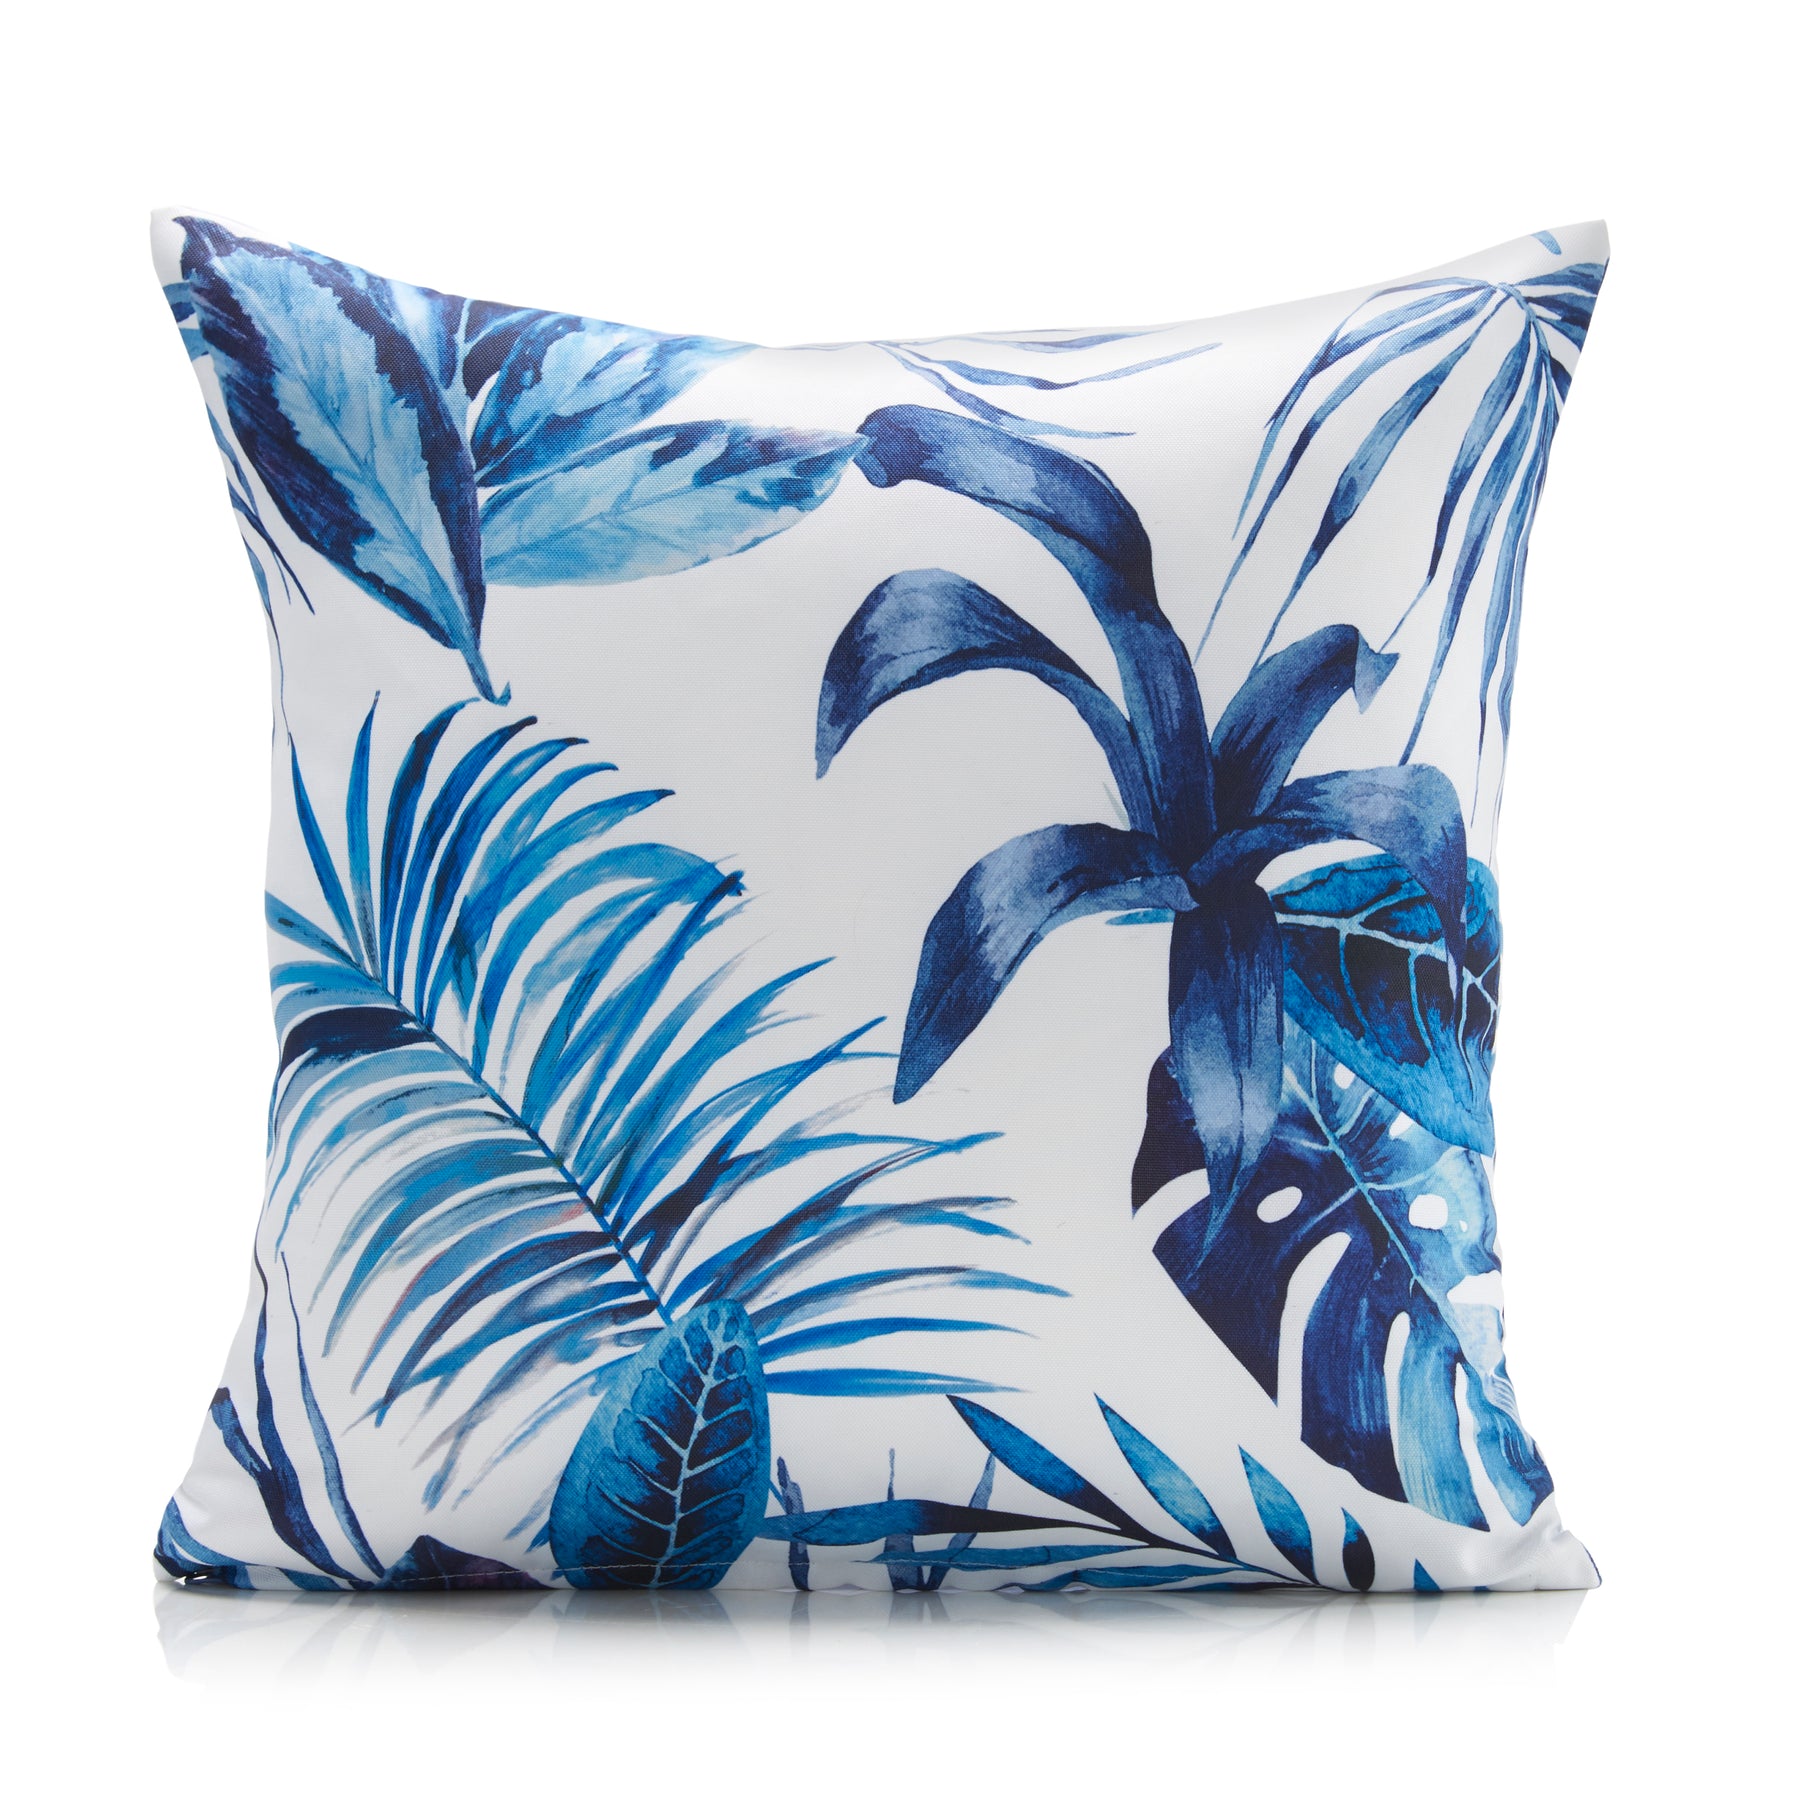 Tropical Water Resistant Outdoor Filled Cushion 56cm x 56cm Blue